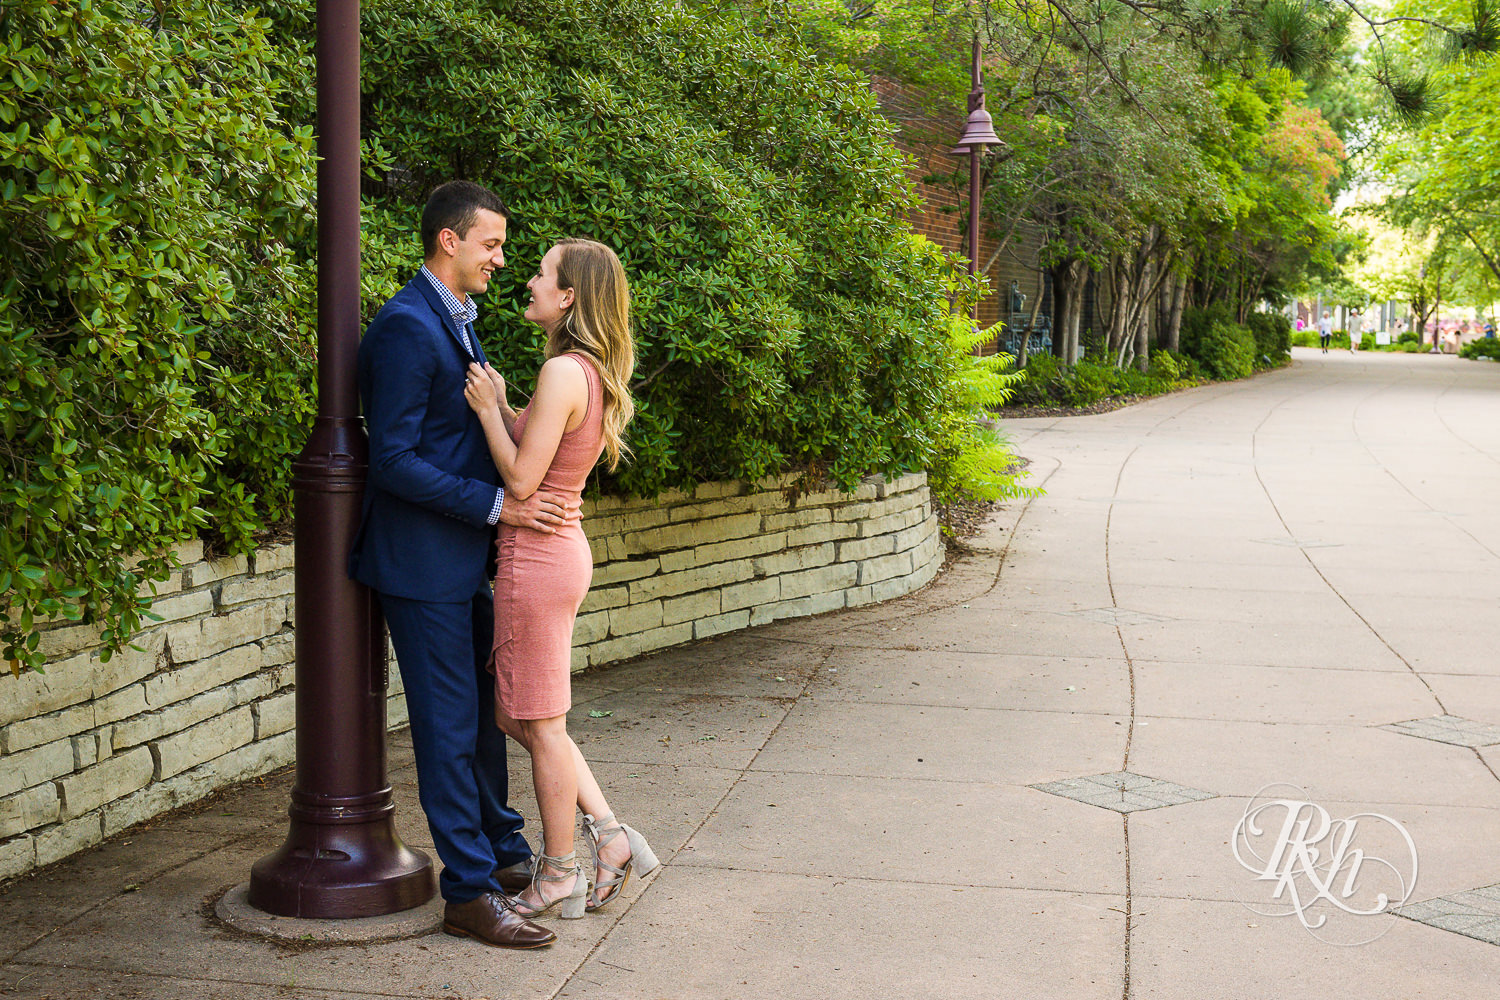 Man in blue suit and woman in pink dress smile during Centennial Lakes Park engagement photography in Edina, Minnesota.